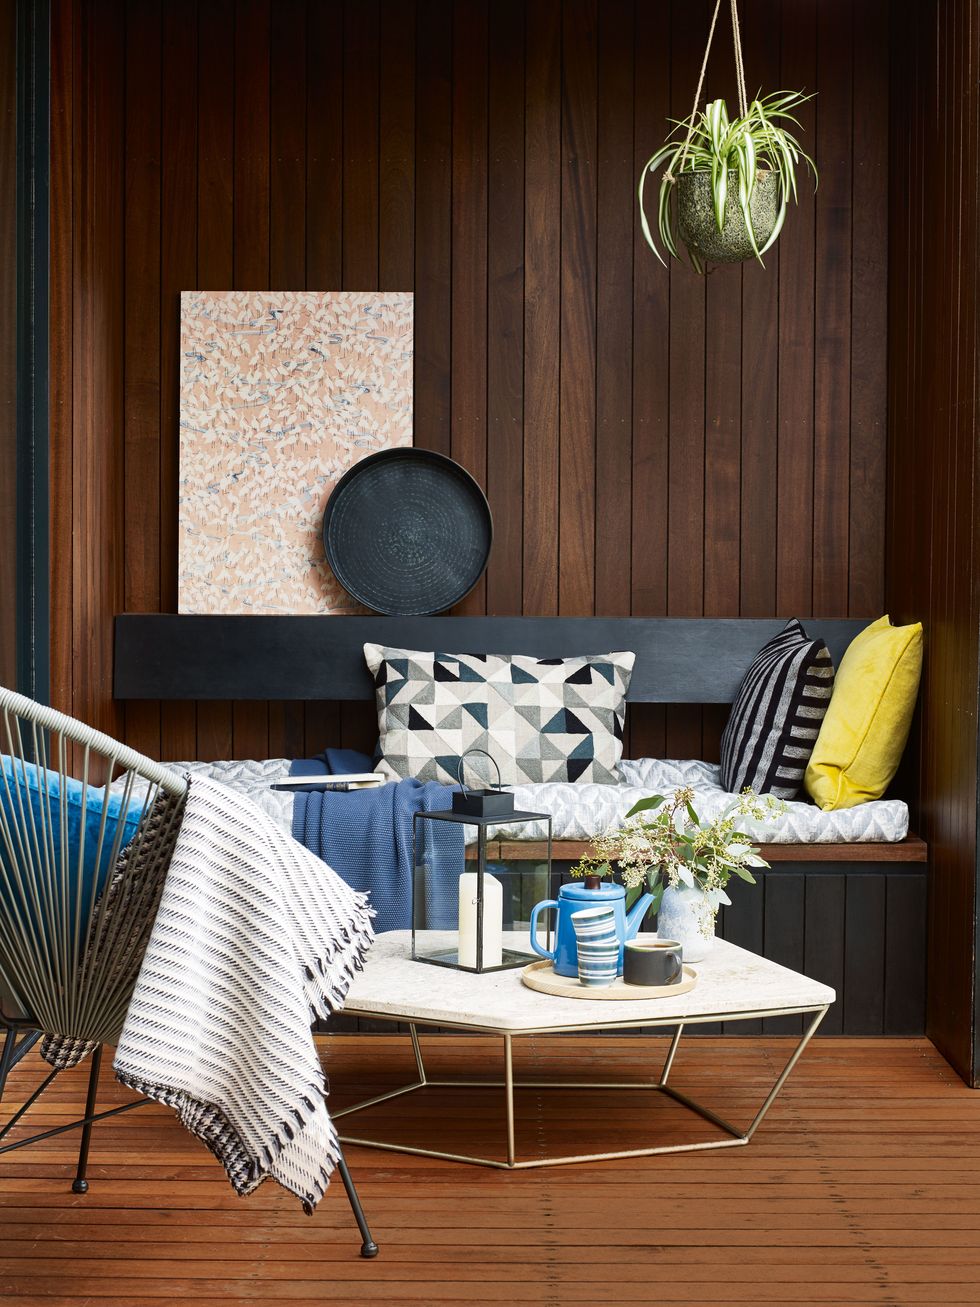 Modern Oriental decorating ideas - style inspiration
Styling by Marisa Daley. Styling Assistant: Amy Neason. Photography: Carolyn Barber.